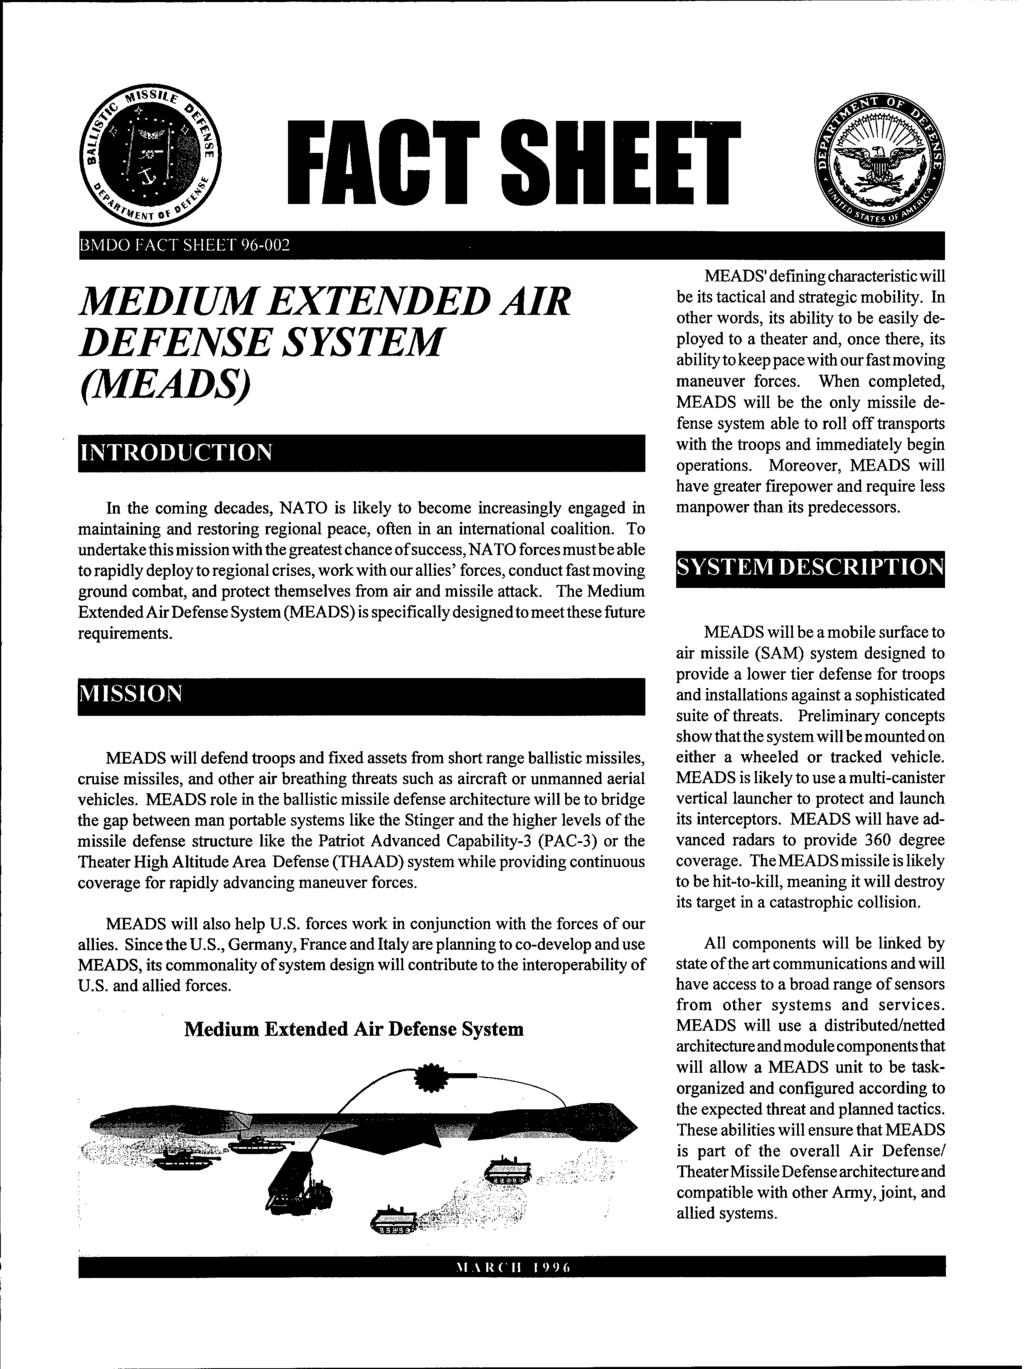 FACT SHEET BMDO FACT SHEET 96-002 MEDIUM EXTENDED AIR DEFENSE SYSTEM (MEADS) INTRODUCTION In the coming decades, NATO is likely to become increasingly engaged in maintaining and restoring regional